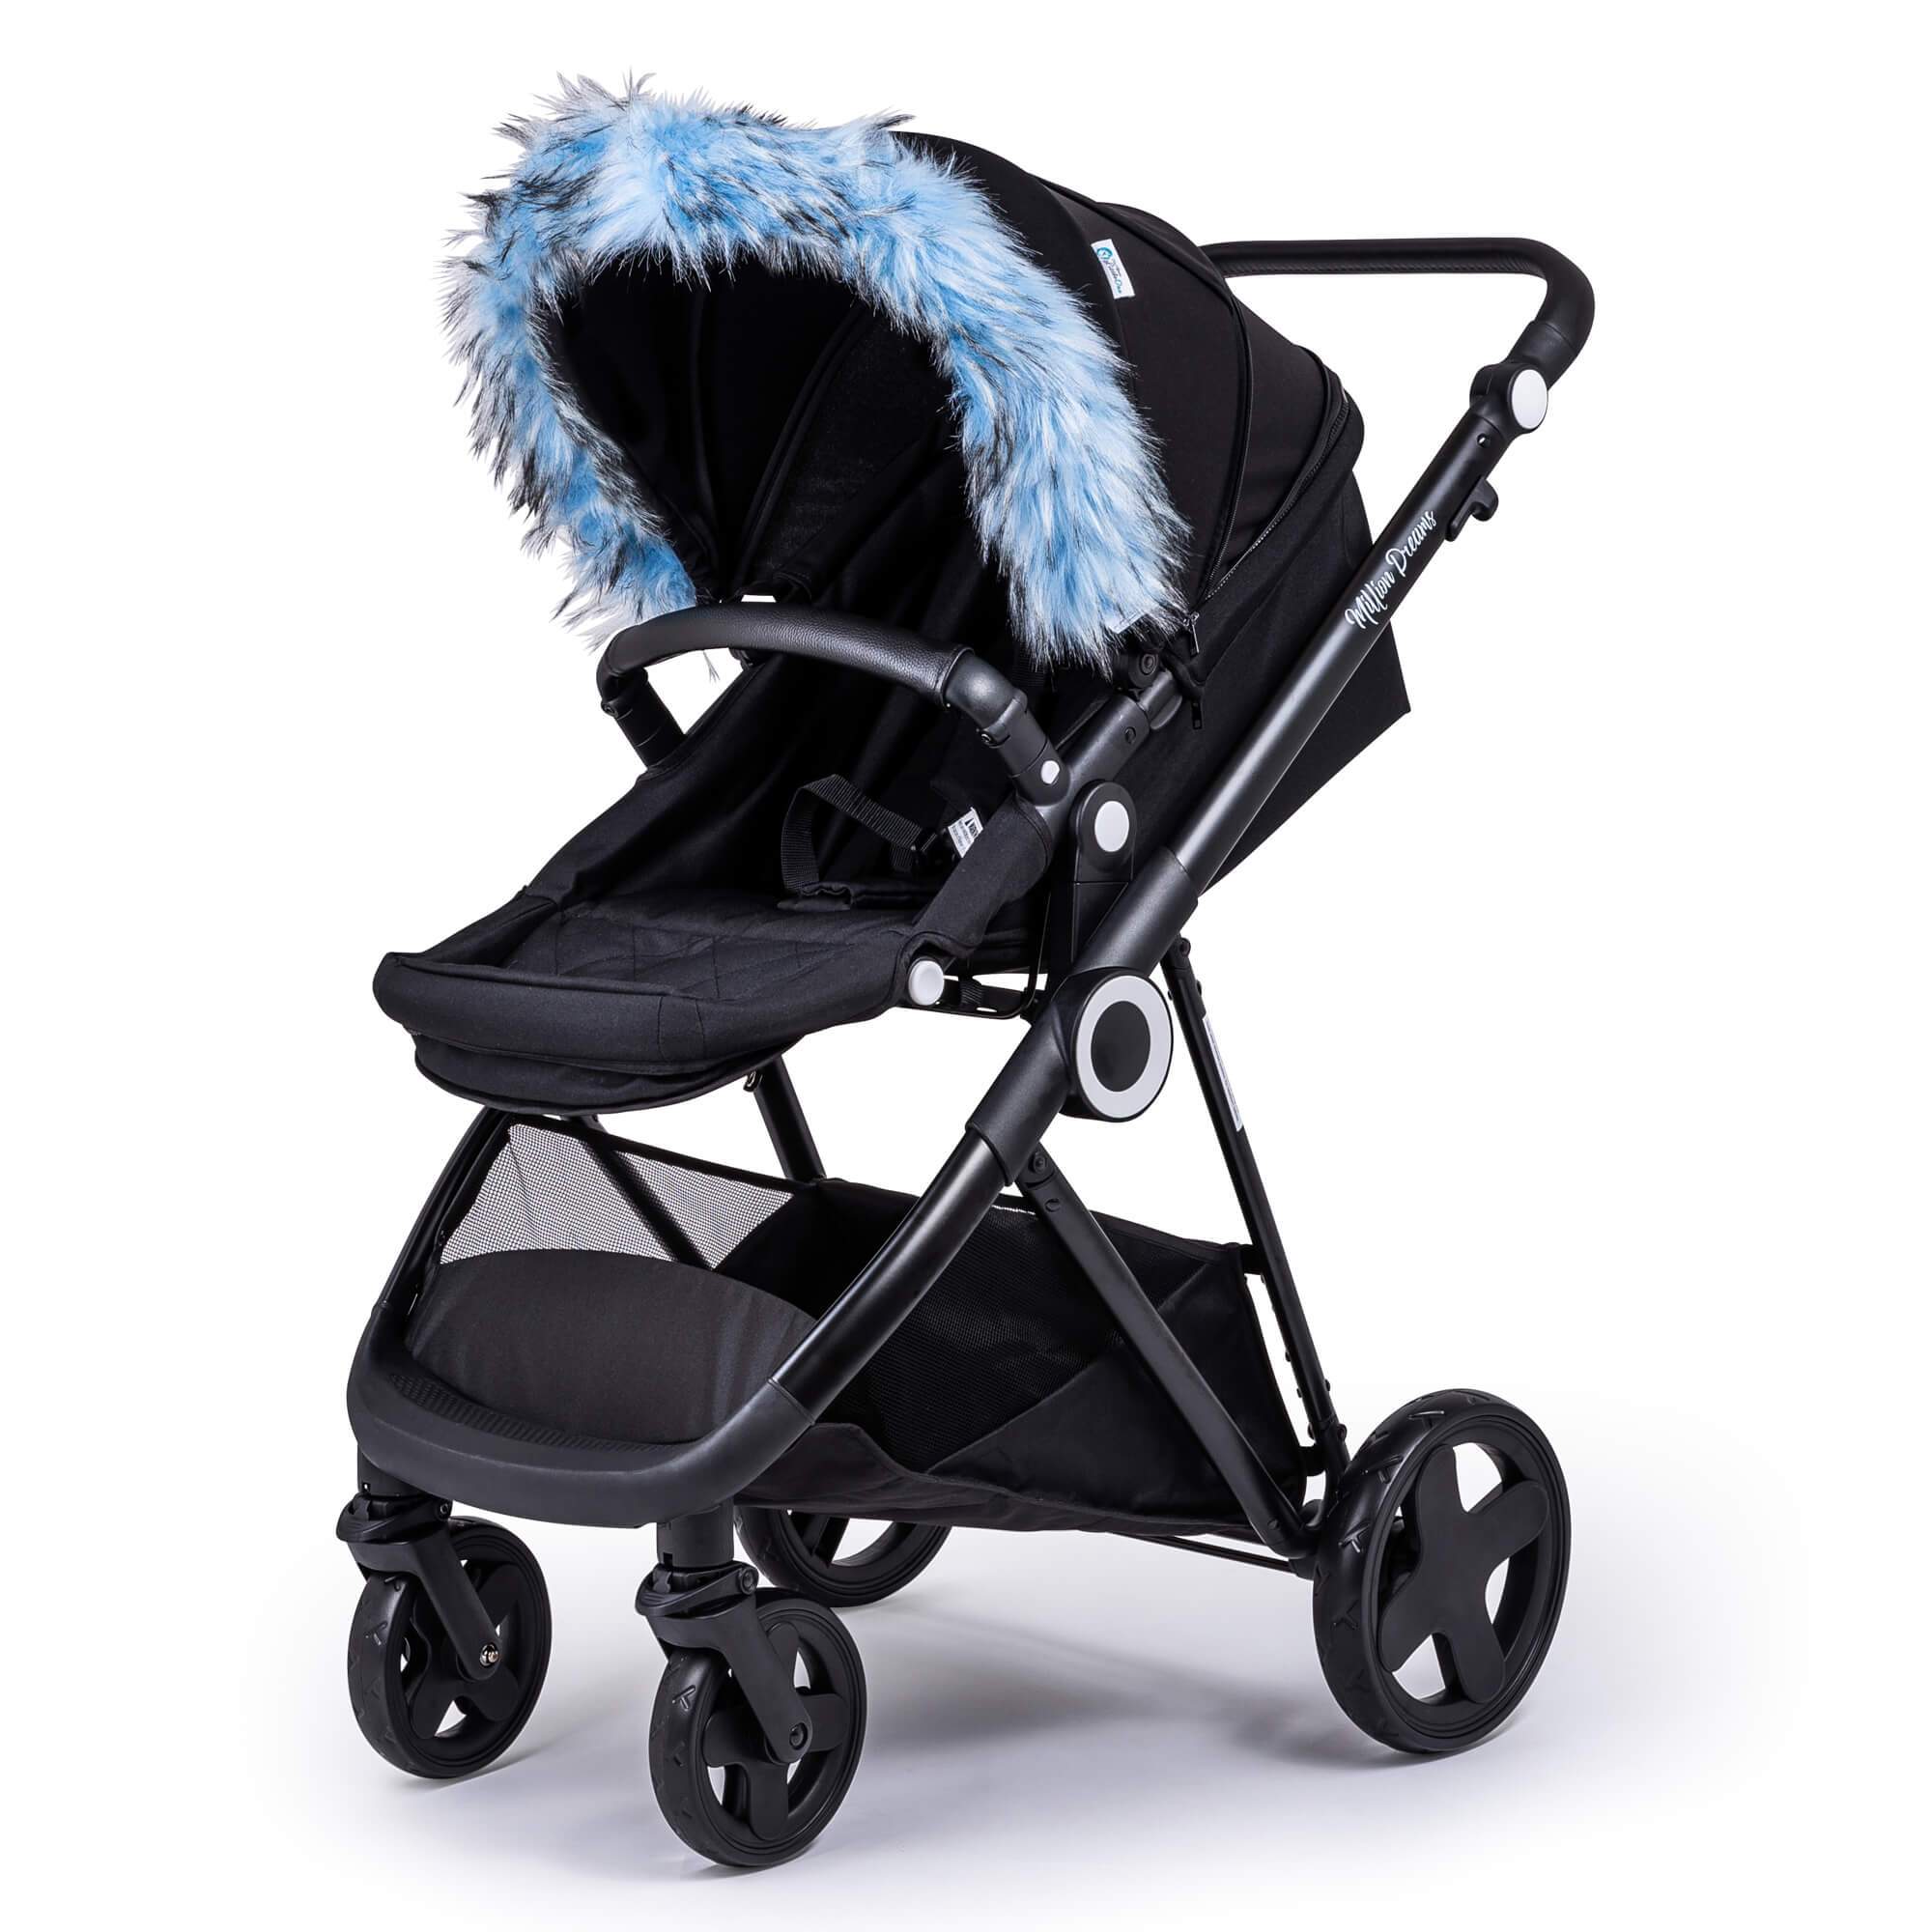 Pram Fur Hood Trim Attachment for Pushchair Compatible with Kiddicare - Light Blue / Fits All Models | For Your Little One